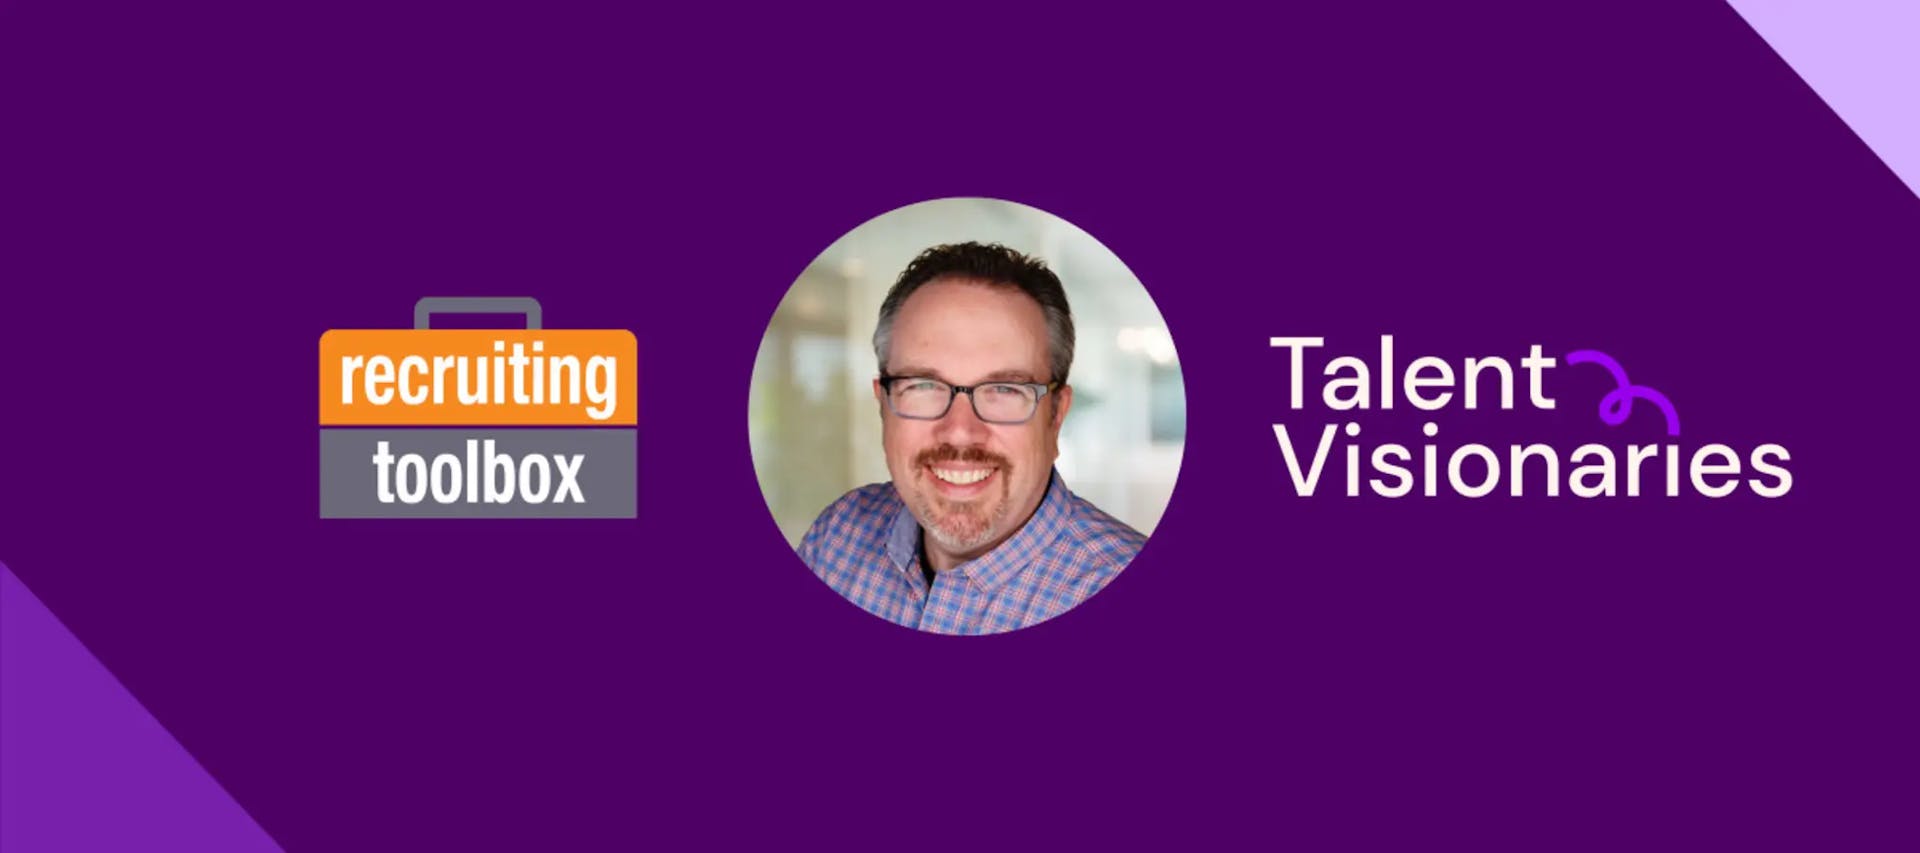 Recruiting Toolbox logo on the left with a headshot of John Vlastelica in the middle. SeekOut's Talent Visionaries logo is on the right side. 